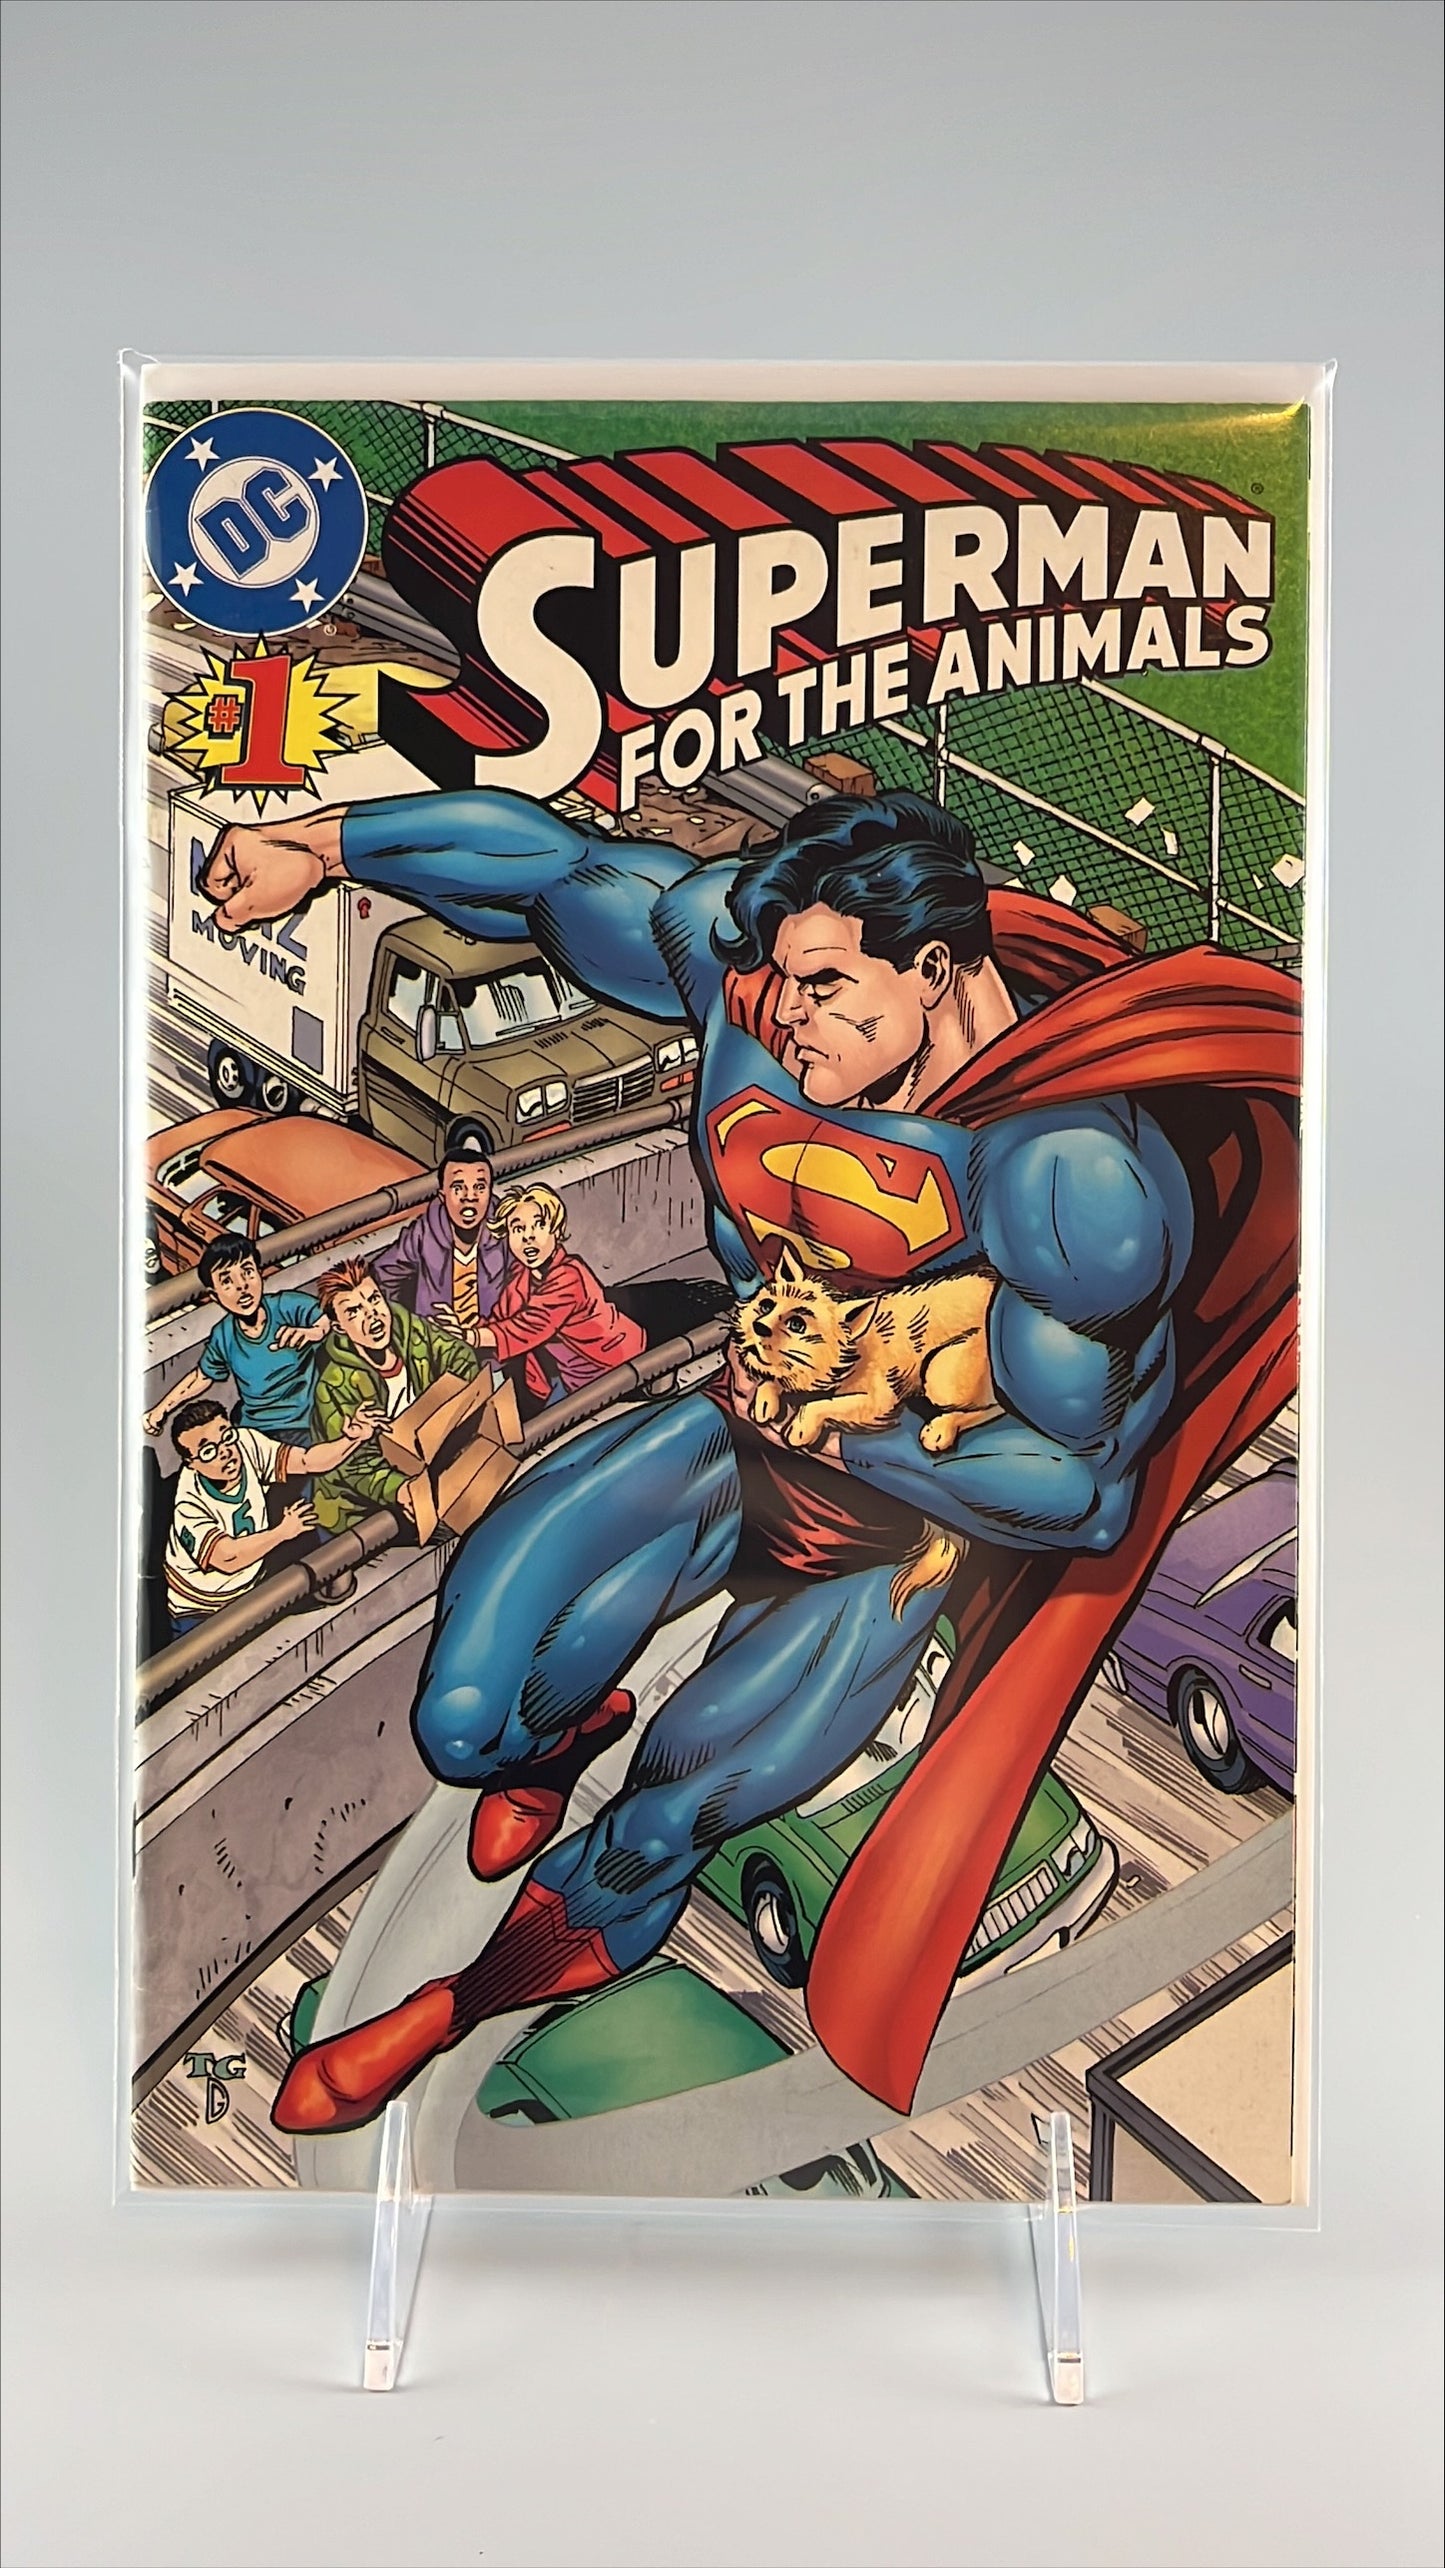 Superman For the Animals #1